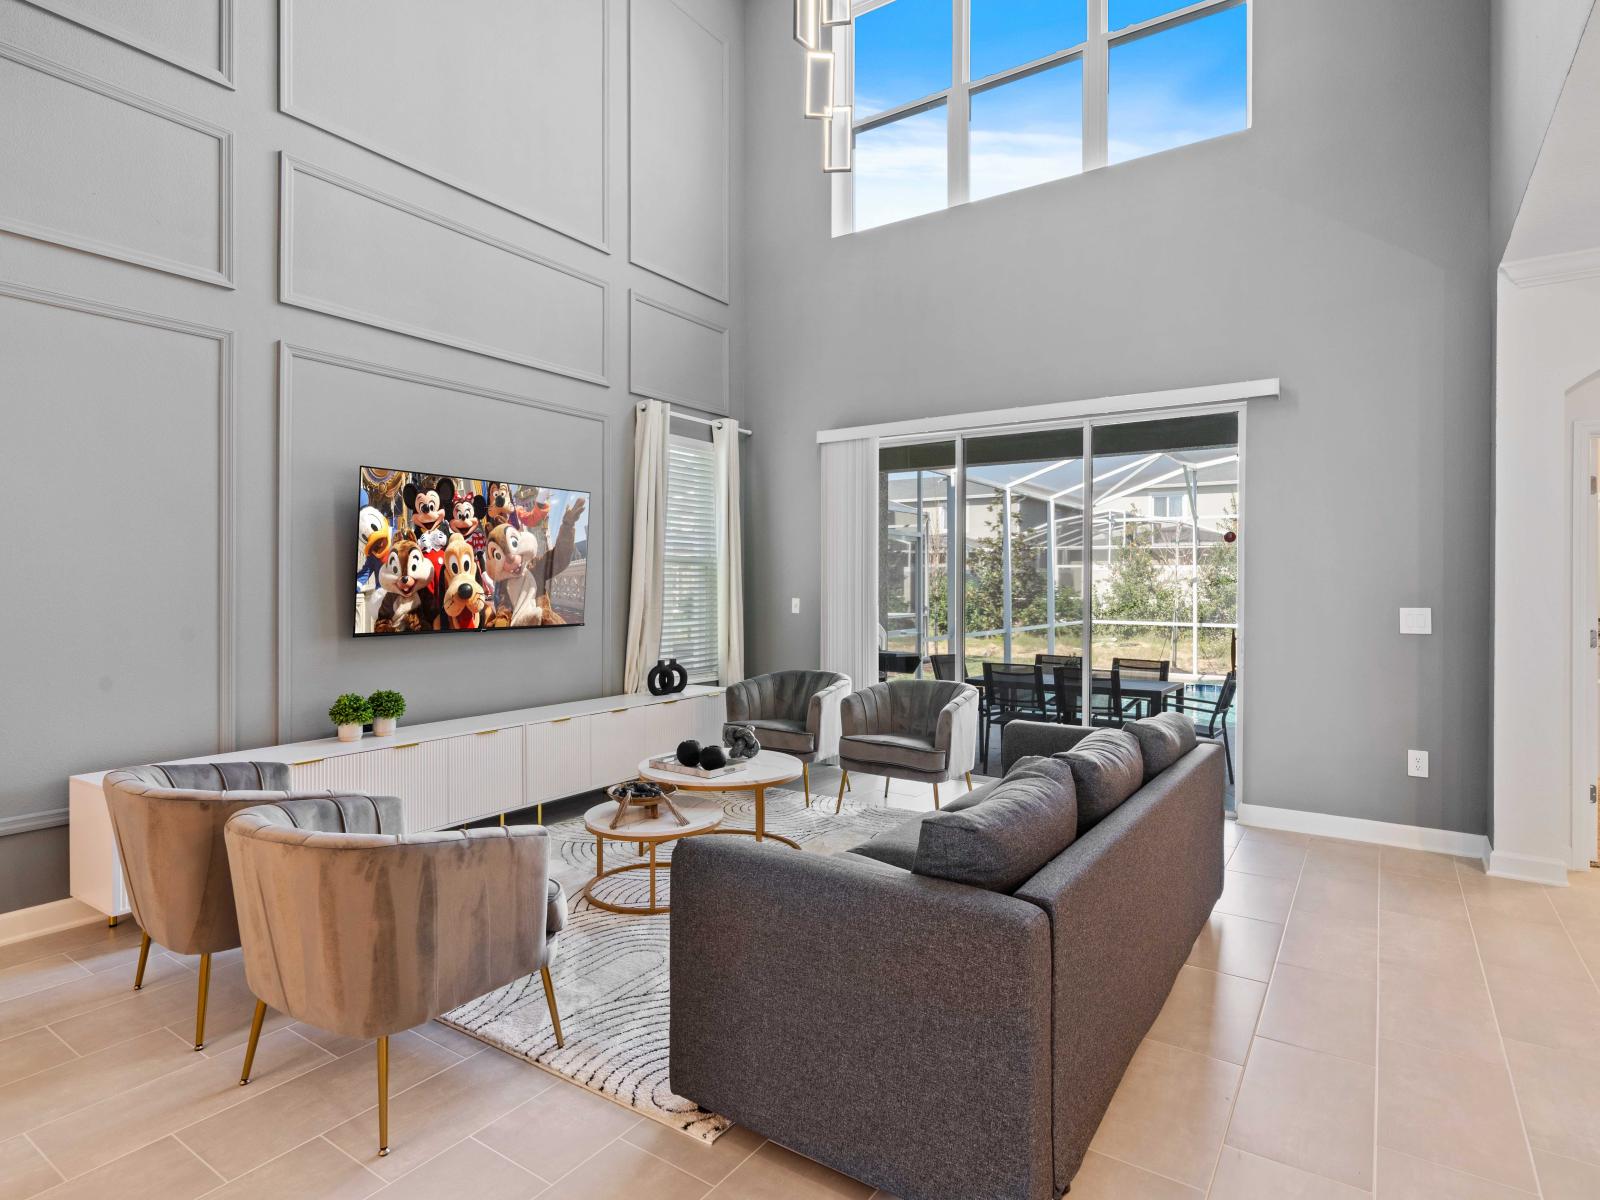 Lavish Living Area of the Home in Davenport Florida - Experience the epitome of elegance in living area - Every detail is curated for a luxurious and indulgent escape - Smart TV and Netflix - Versatile seating arrangements